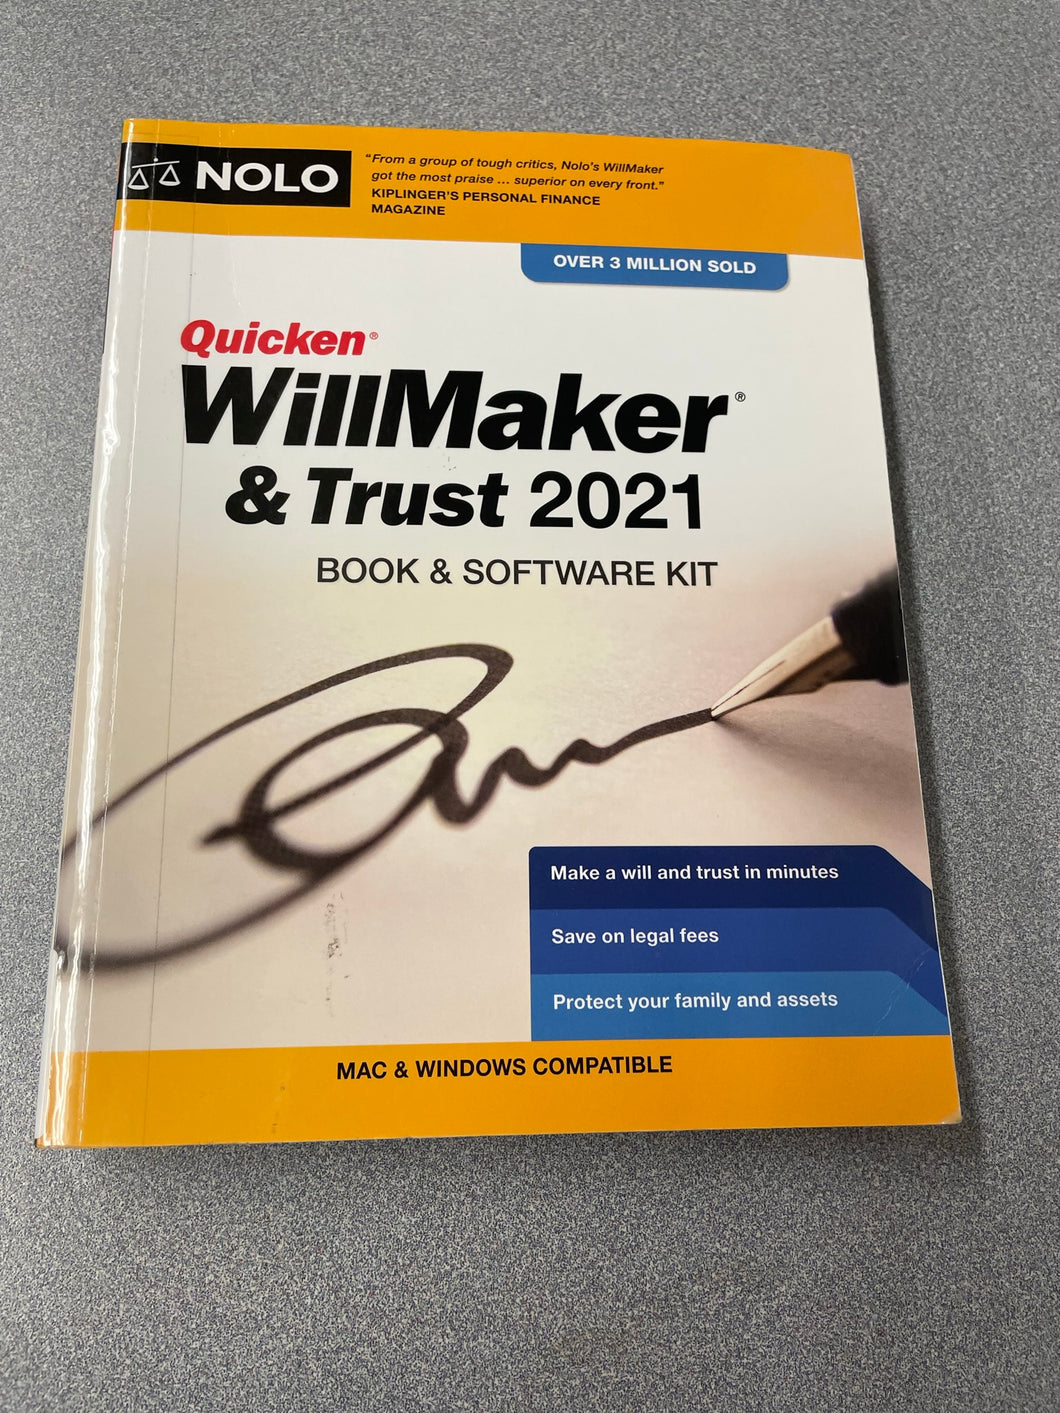 Quicken WilllMaker and Trust 1021: Book and Software Kit, Hannibal, Betsy Simmons, ed., [2021] LAW 10/22